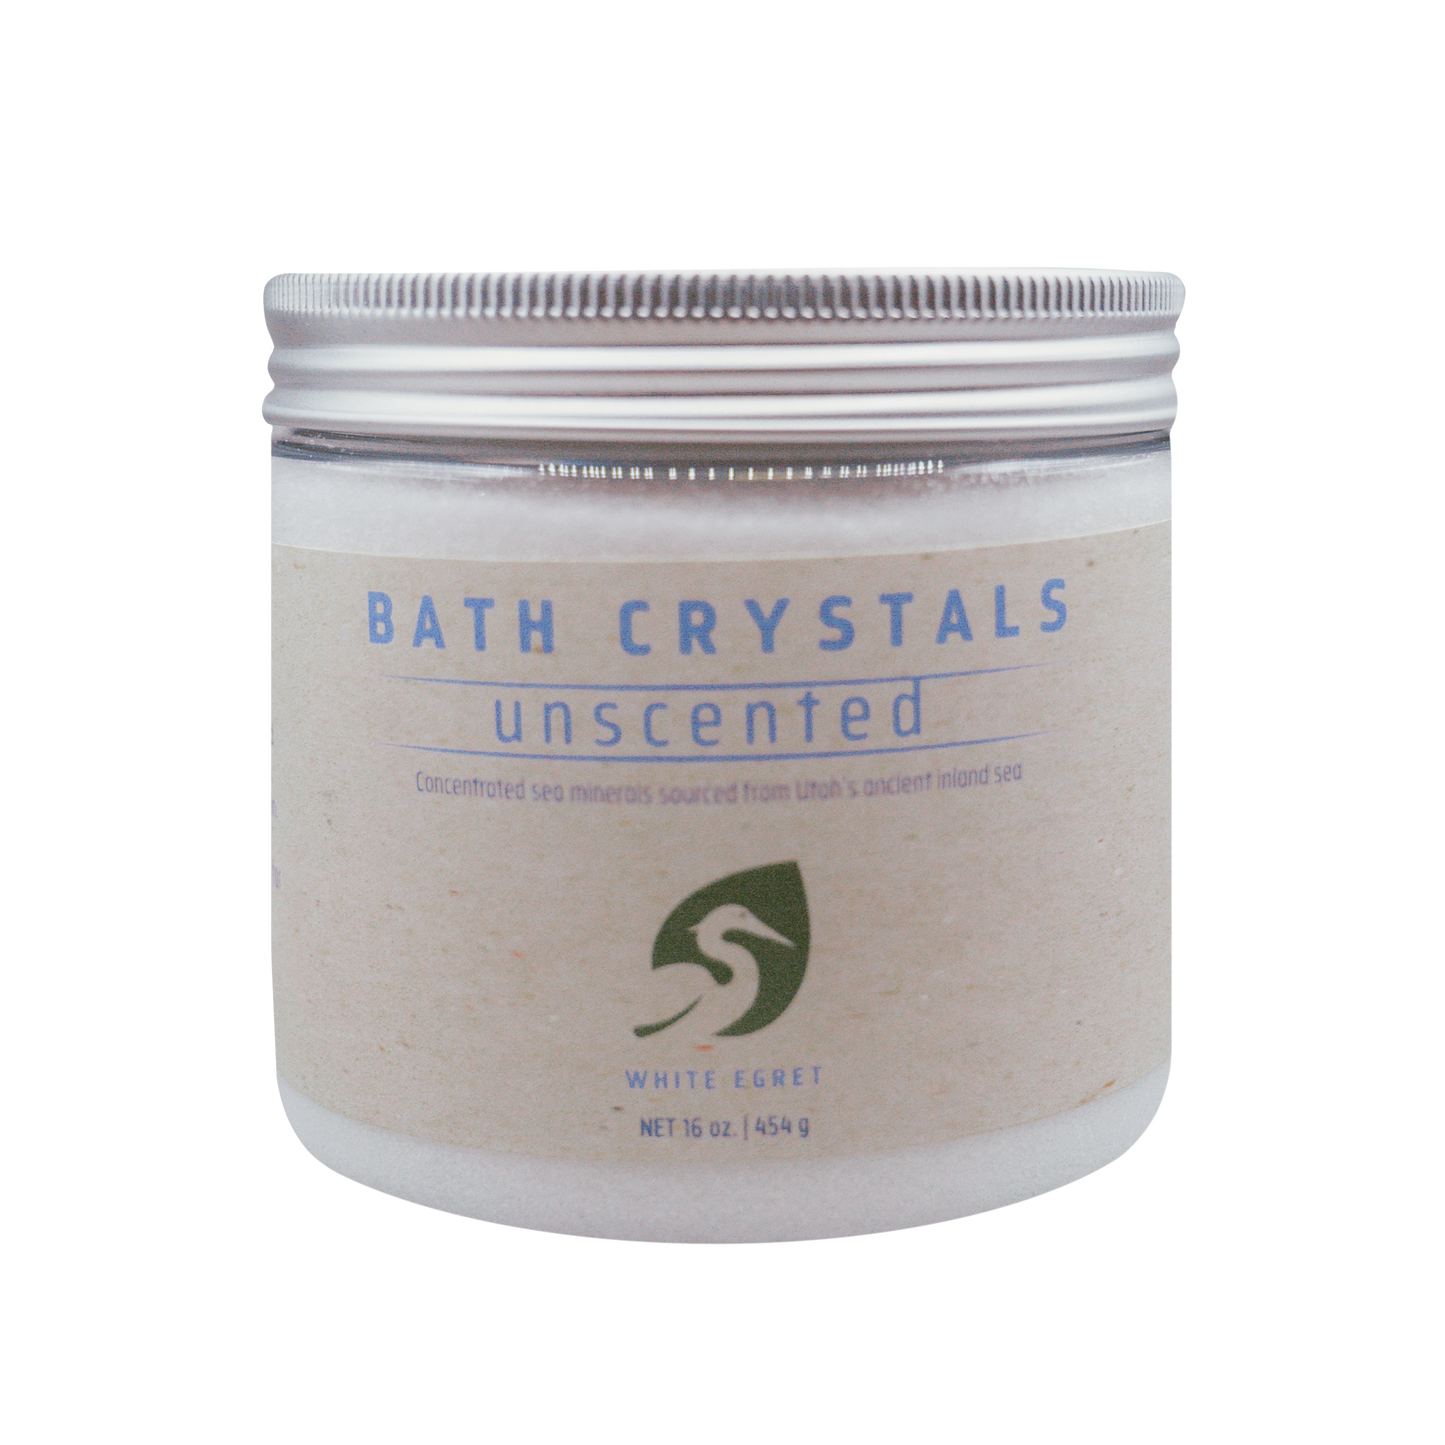 Unscented Bath Crystals - White Egret Personal Care